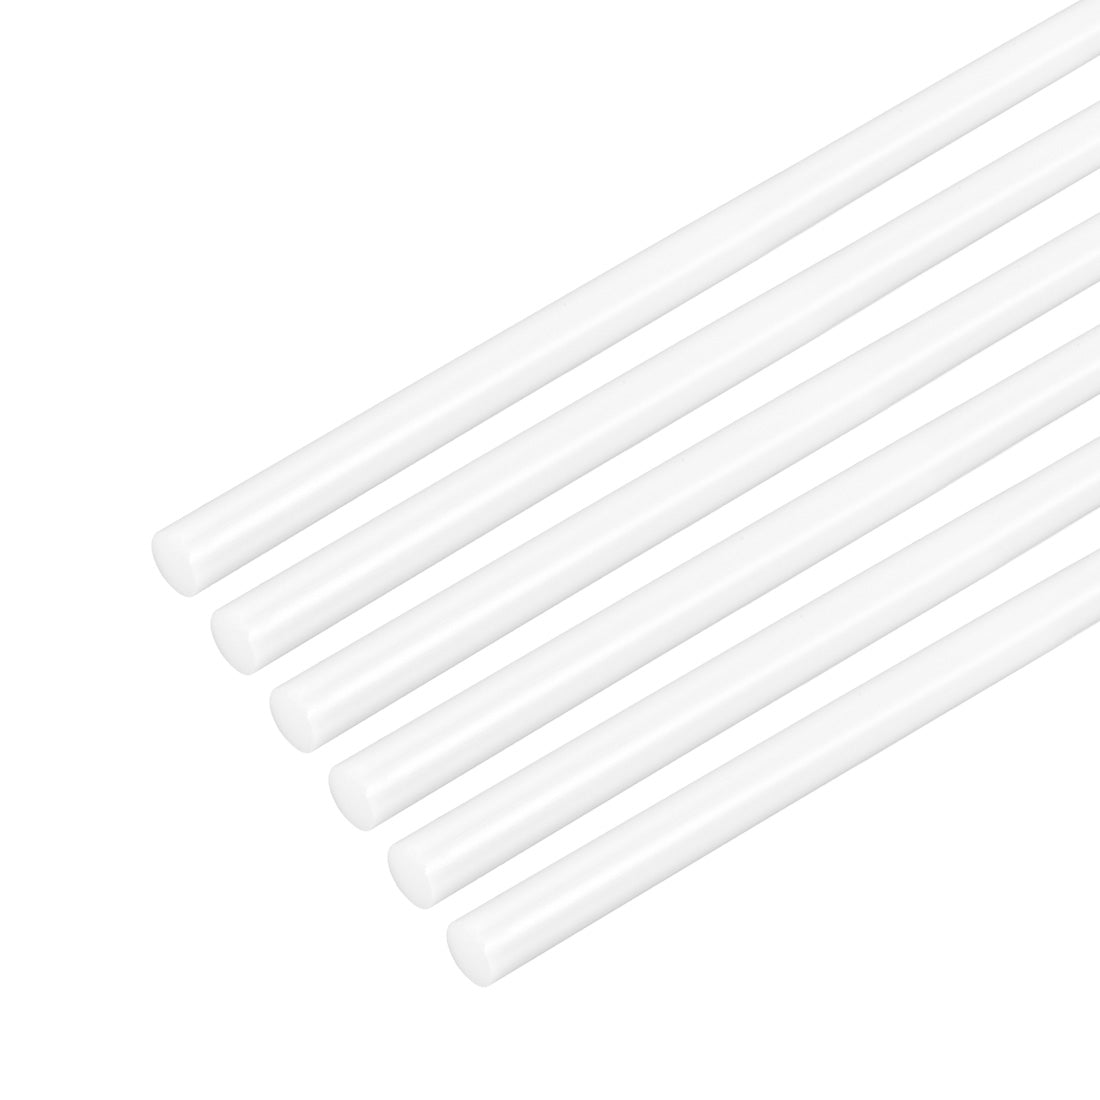 uxcell Uxcell Plastic Round Rod,3mm Dia 50cm White Engineering Plastic Round Bar 6pcs